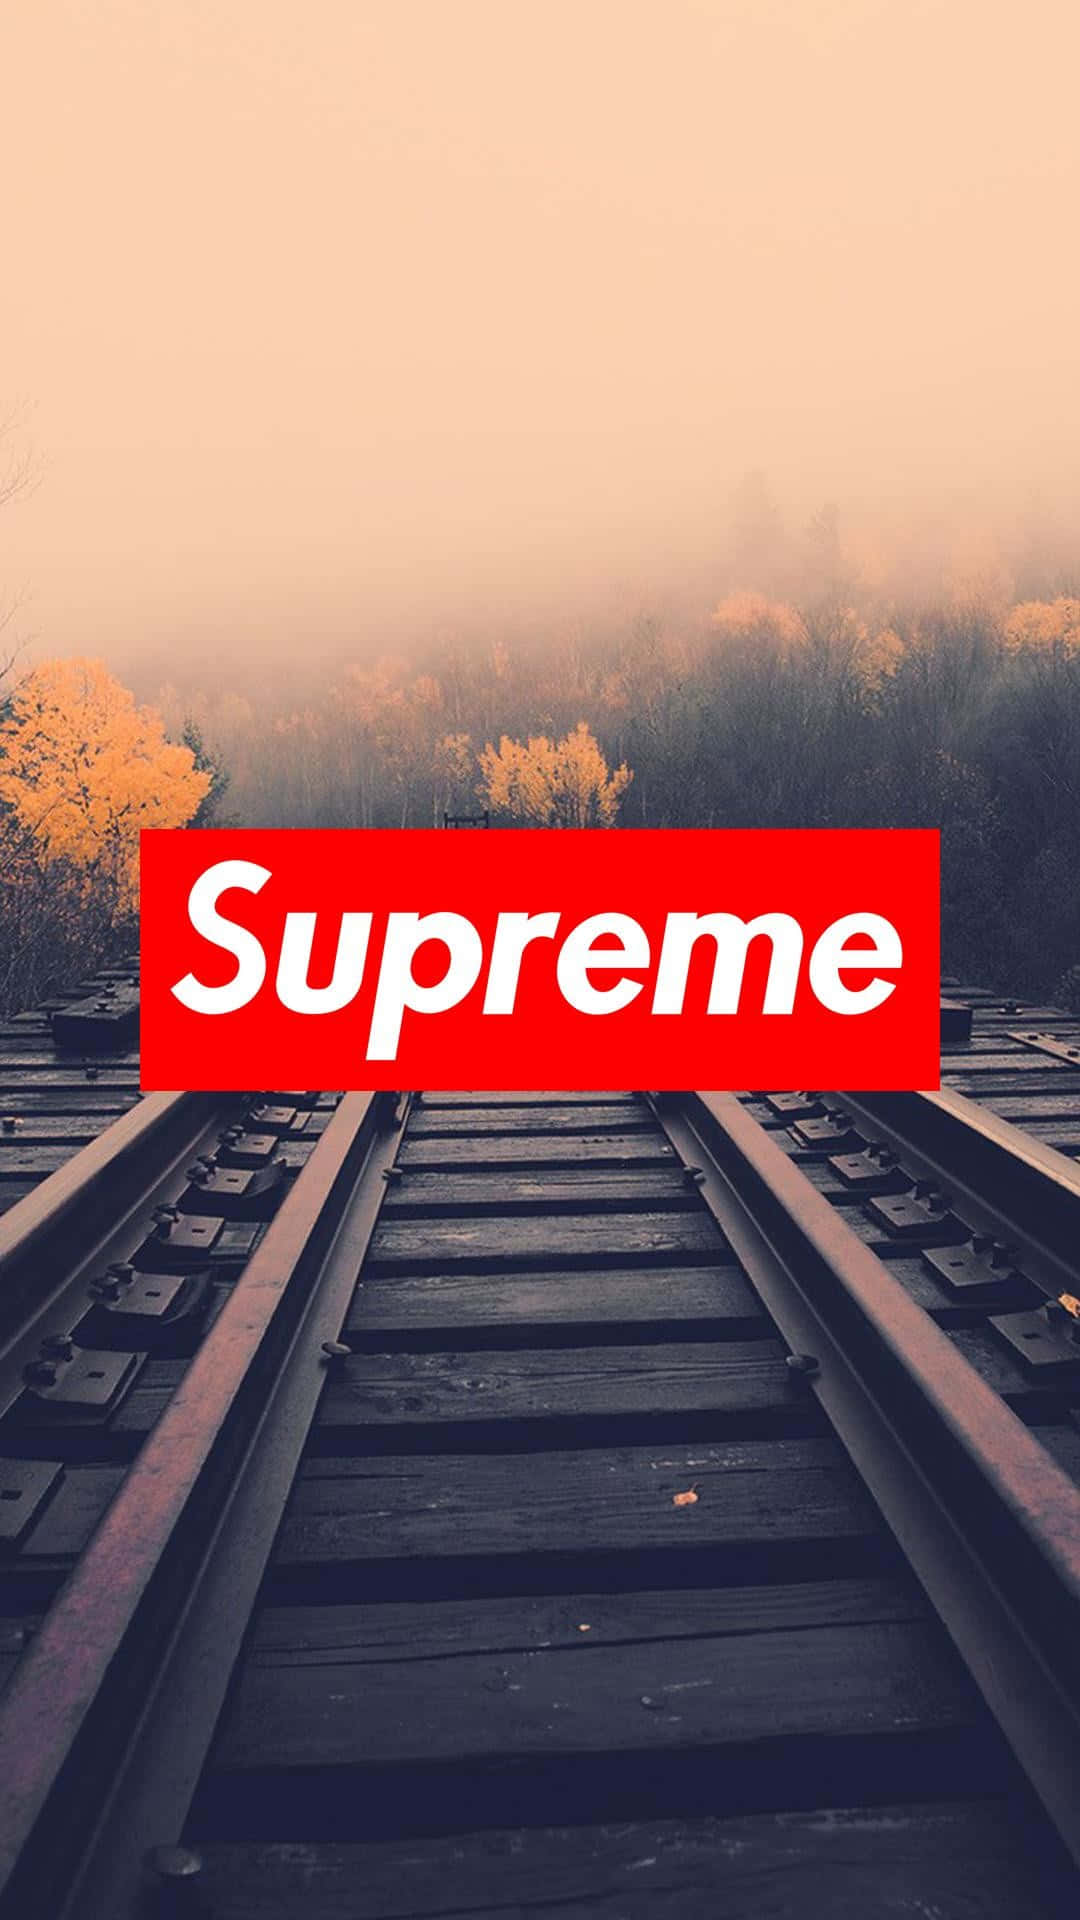 Logo of Supreme, the iconic lifestyle brand Wallpaper